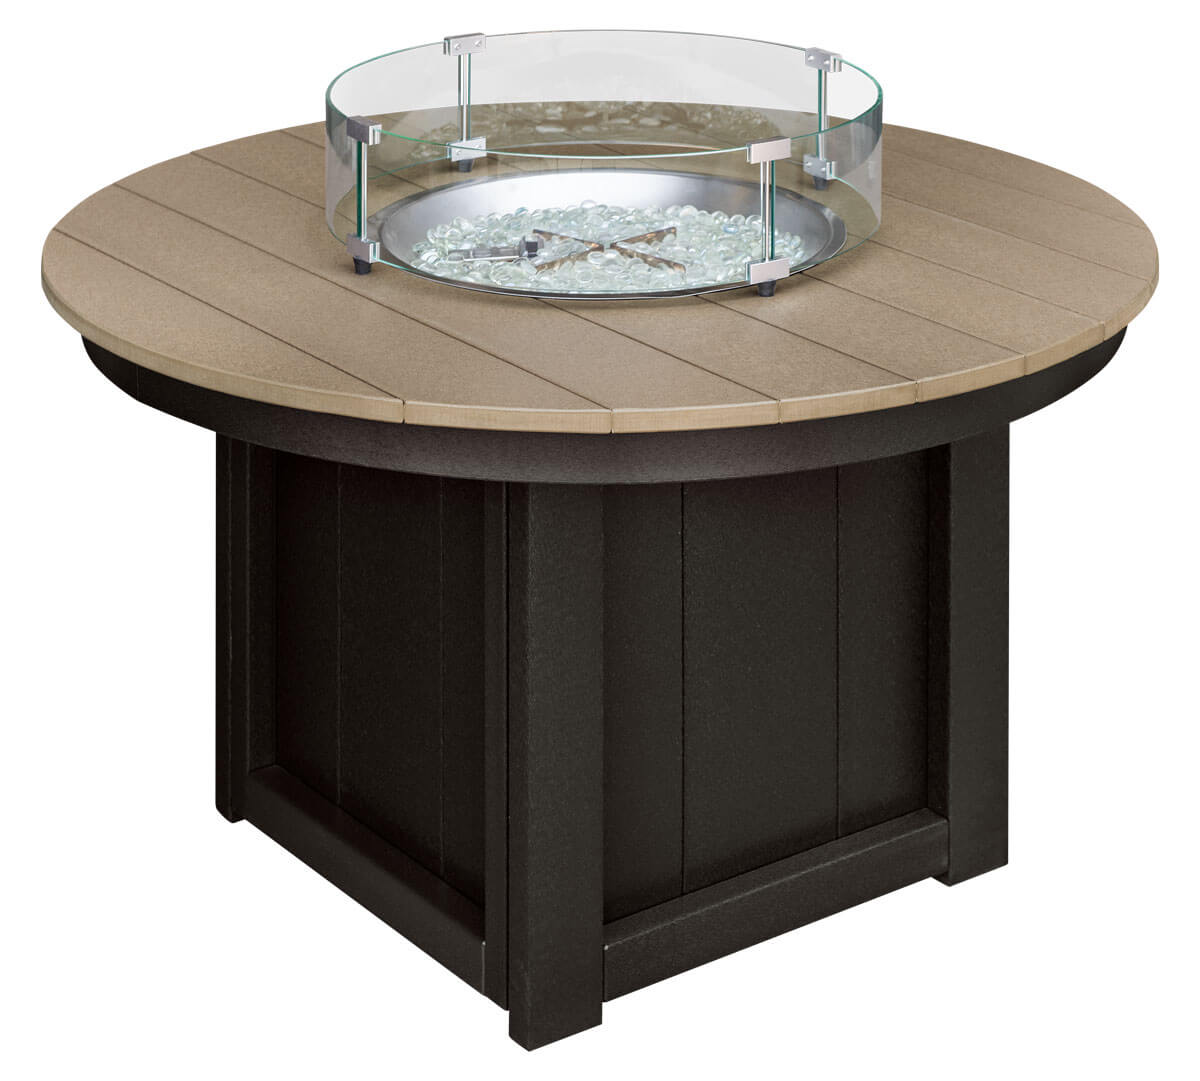 EC Woods Westbrook Outdoor Poly Fire Table Shown in Weathered Wood and Black